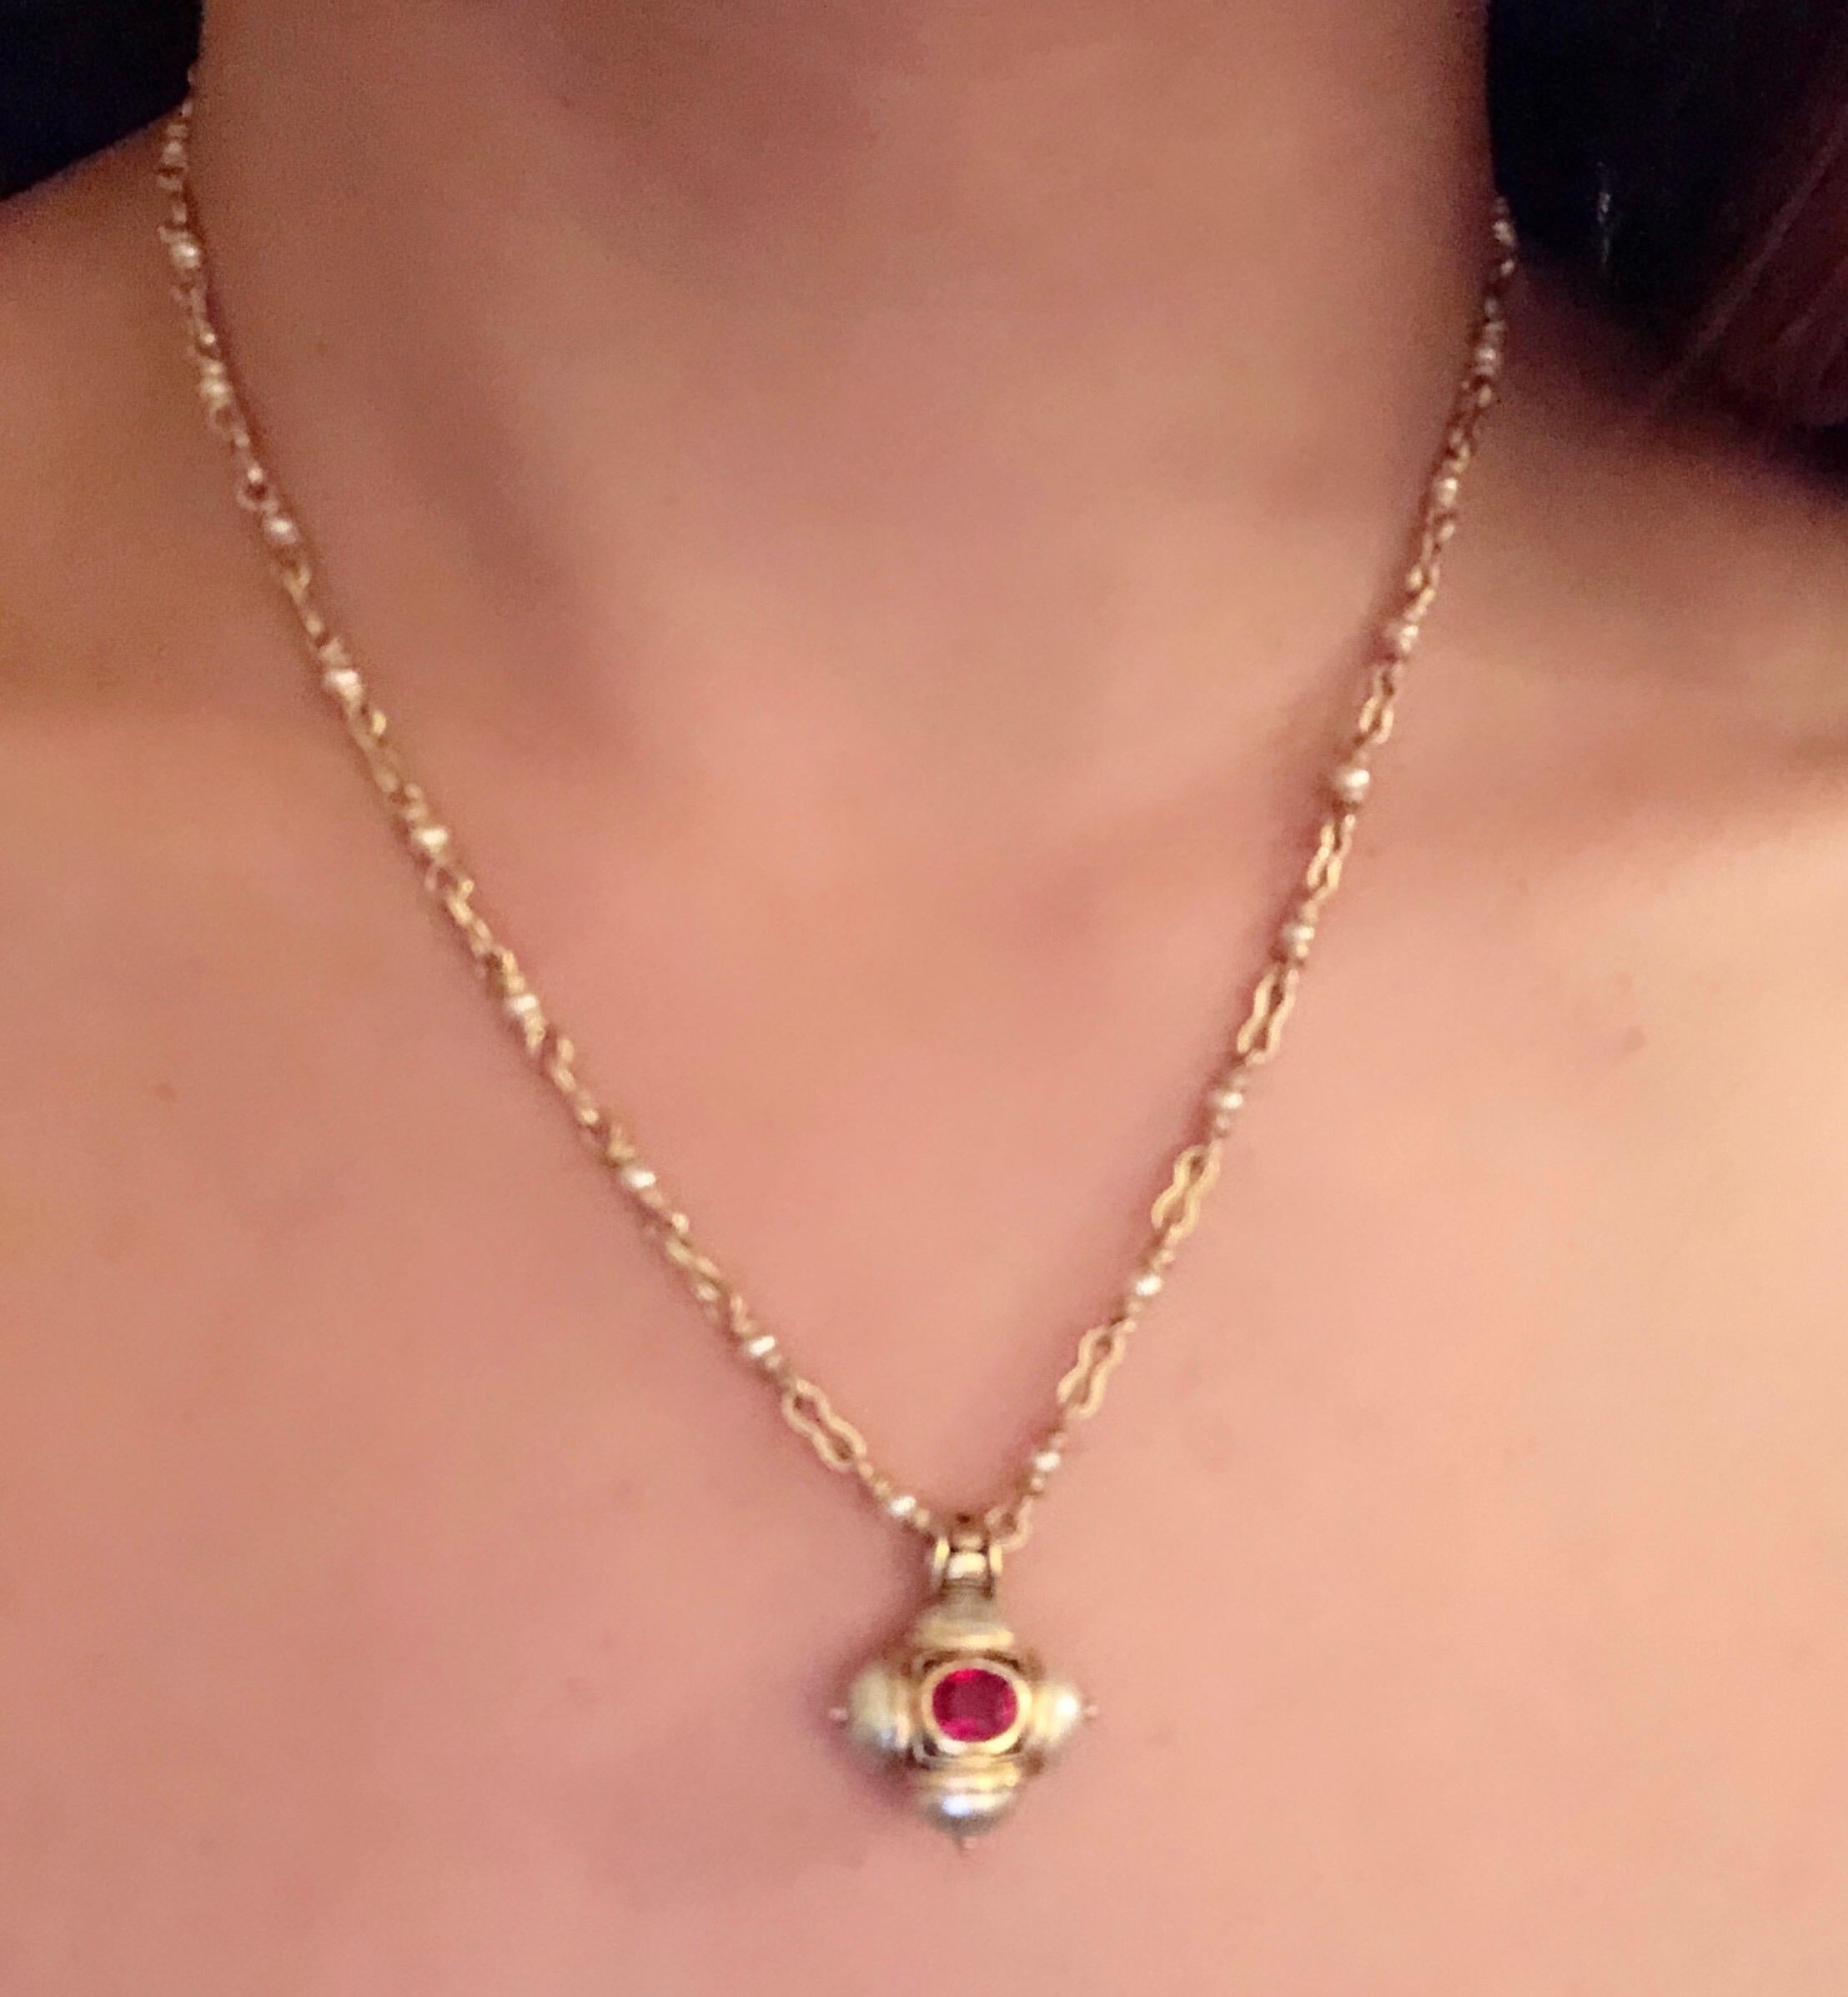 18 KT Gold Otto Jakob Lalibela Necklace, one of the most desired artisans in the world today, creates his jewels with an old world spirit that is mystifying, and this  